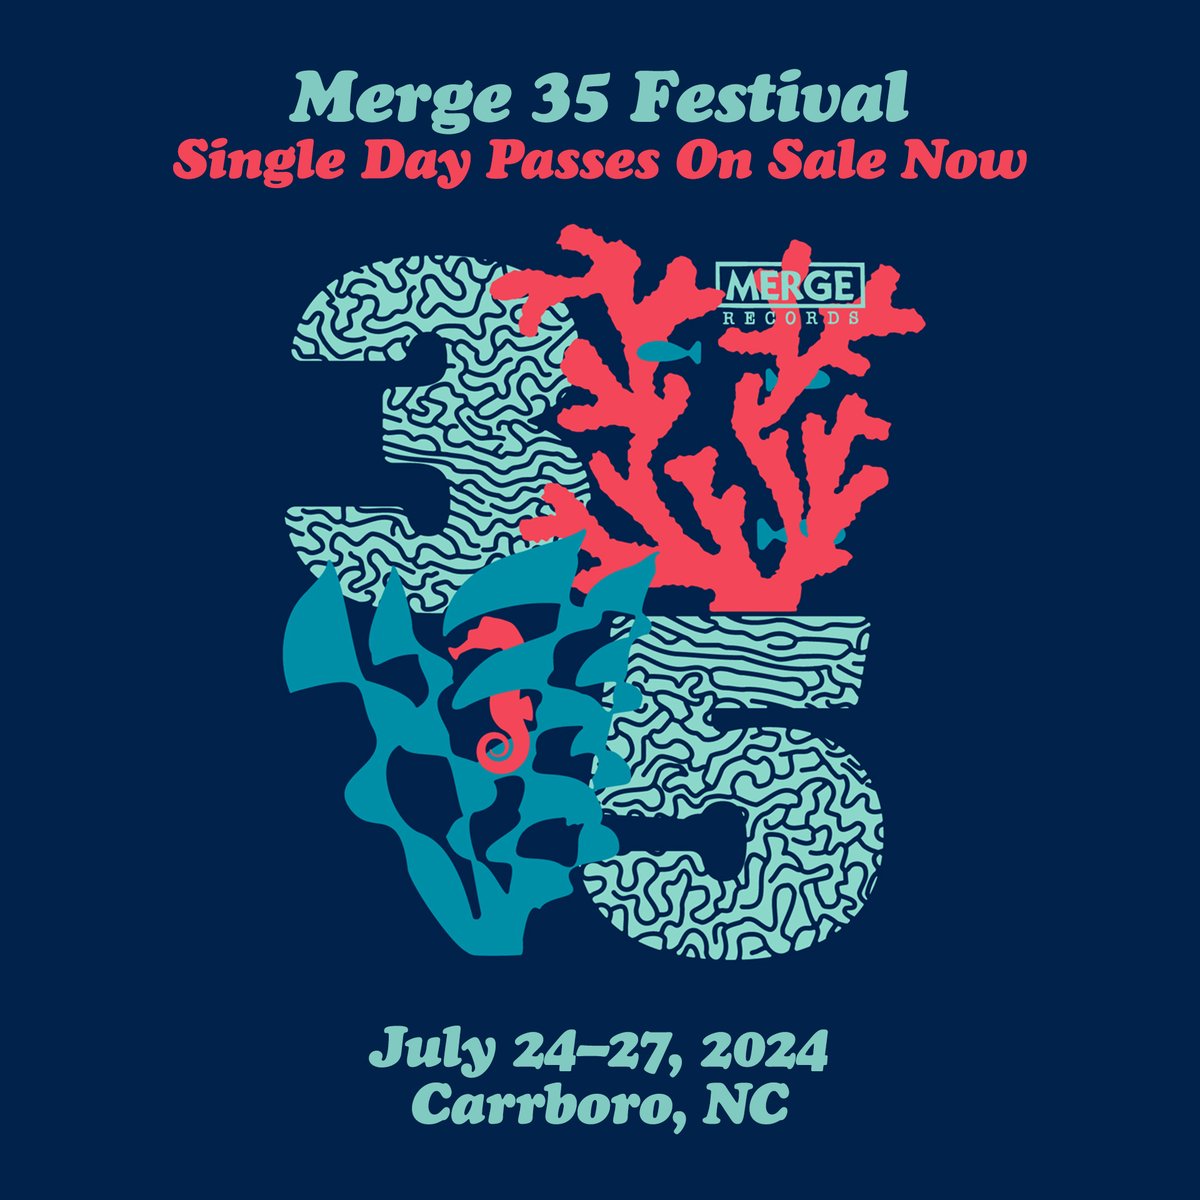 If you missed out, now's your chance- the remaining Merge 35 t-shirts are up on the Merge Store and will not be reprinted! Browse: tinyurl.com/2878zepk There are still some single day tickets left for Wed and Sat of Merge 35! Snag those tickets here: tinyurl.com/rpu4uwd2